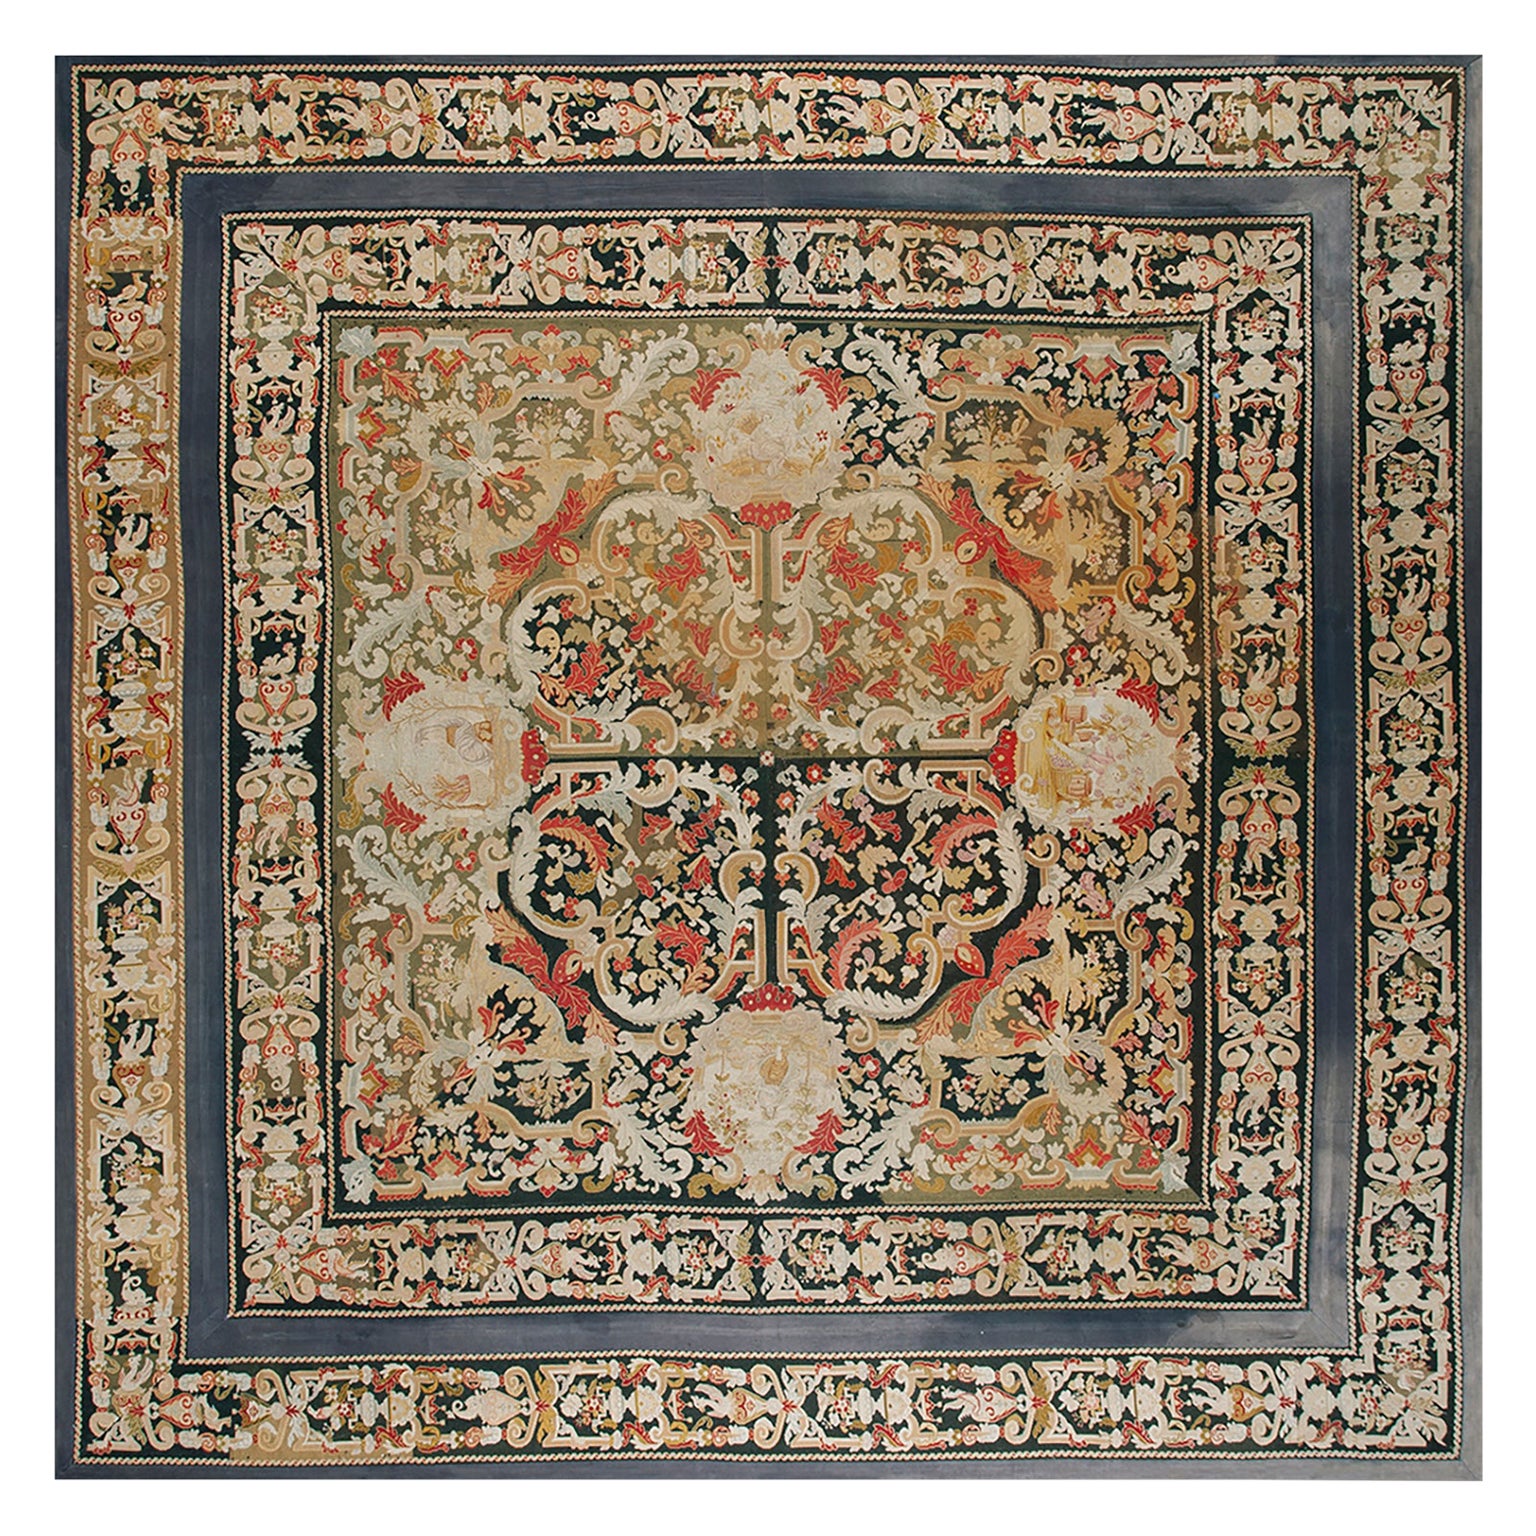 19th Century French Needlepoint Carpet ( 11' x 11' - 335 x 335 ) For Sale